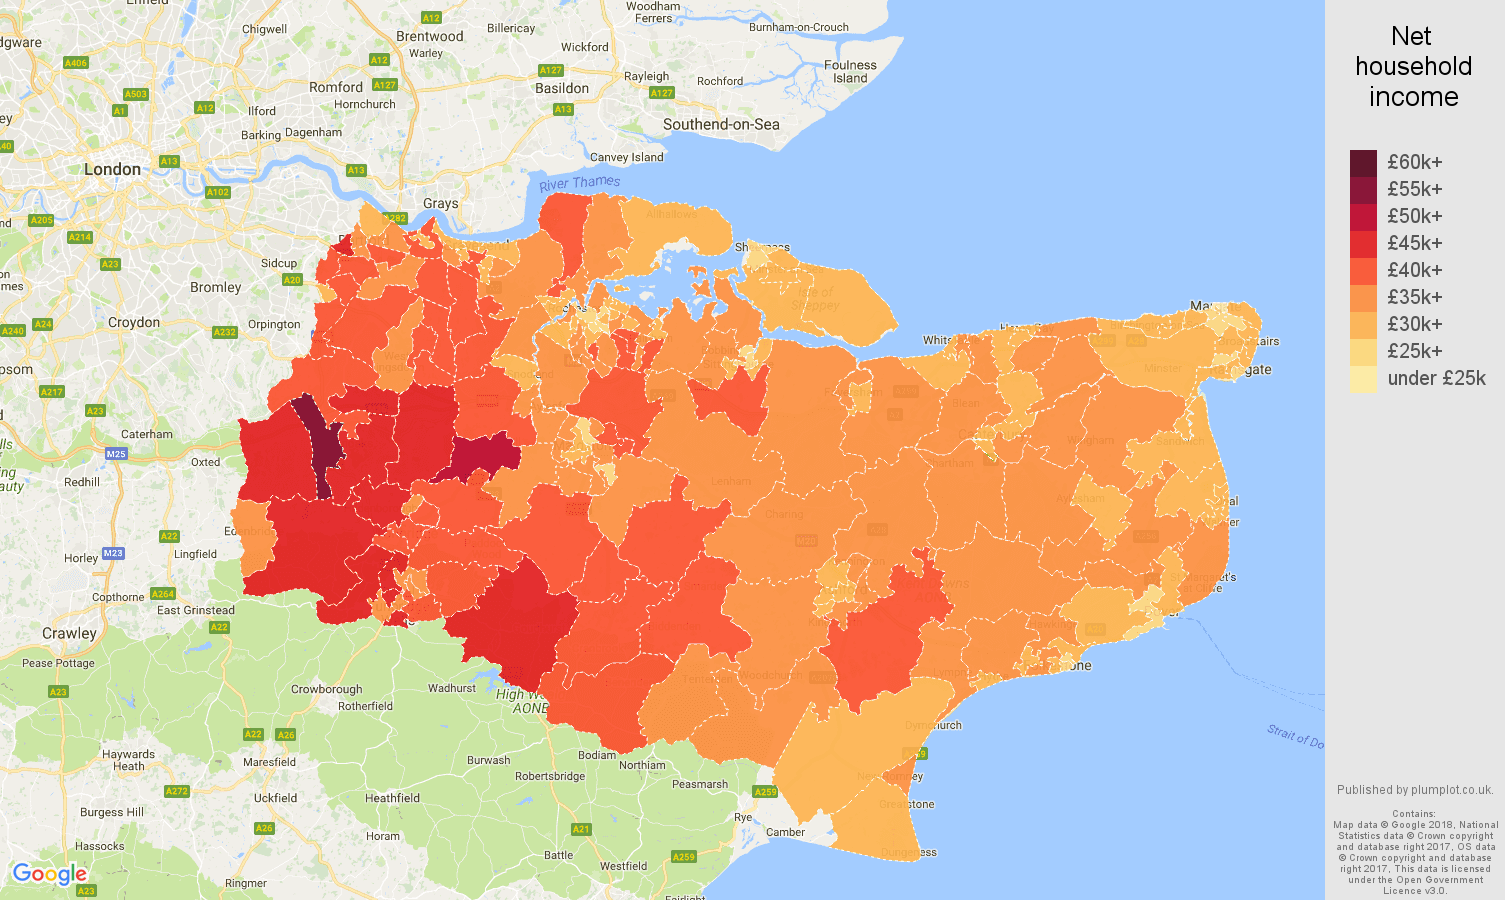 Kent net household income map